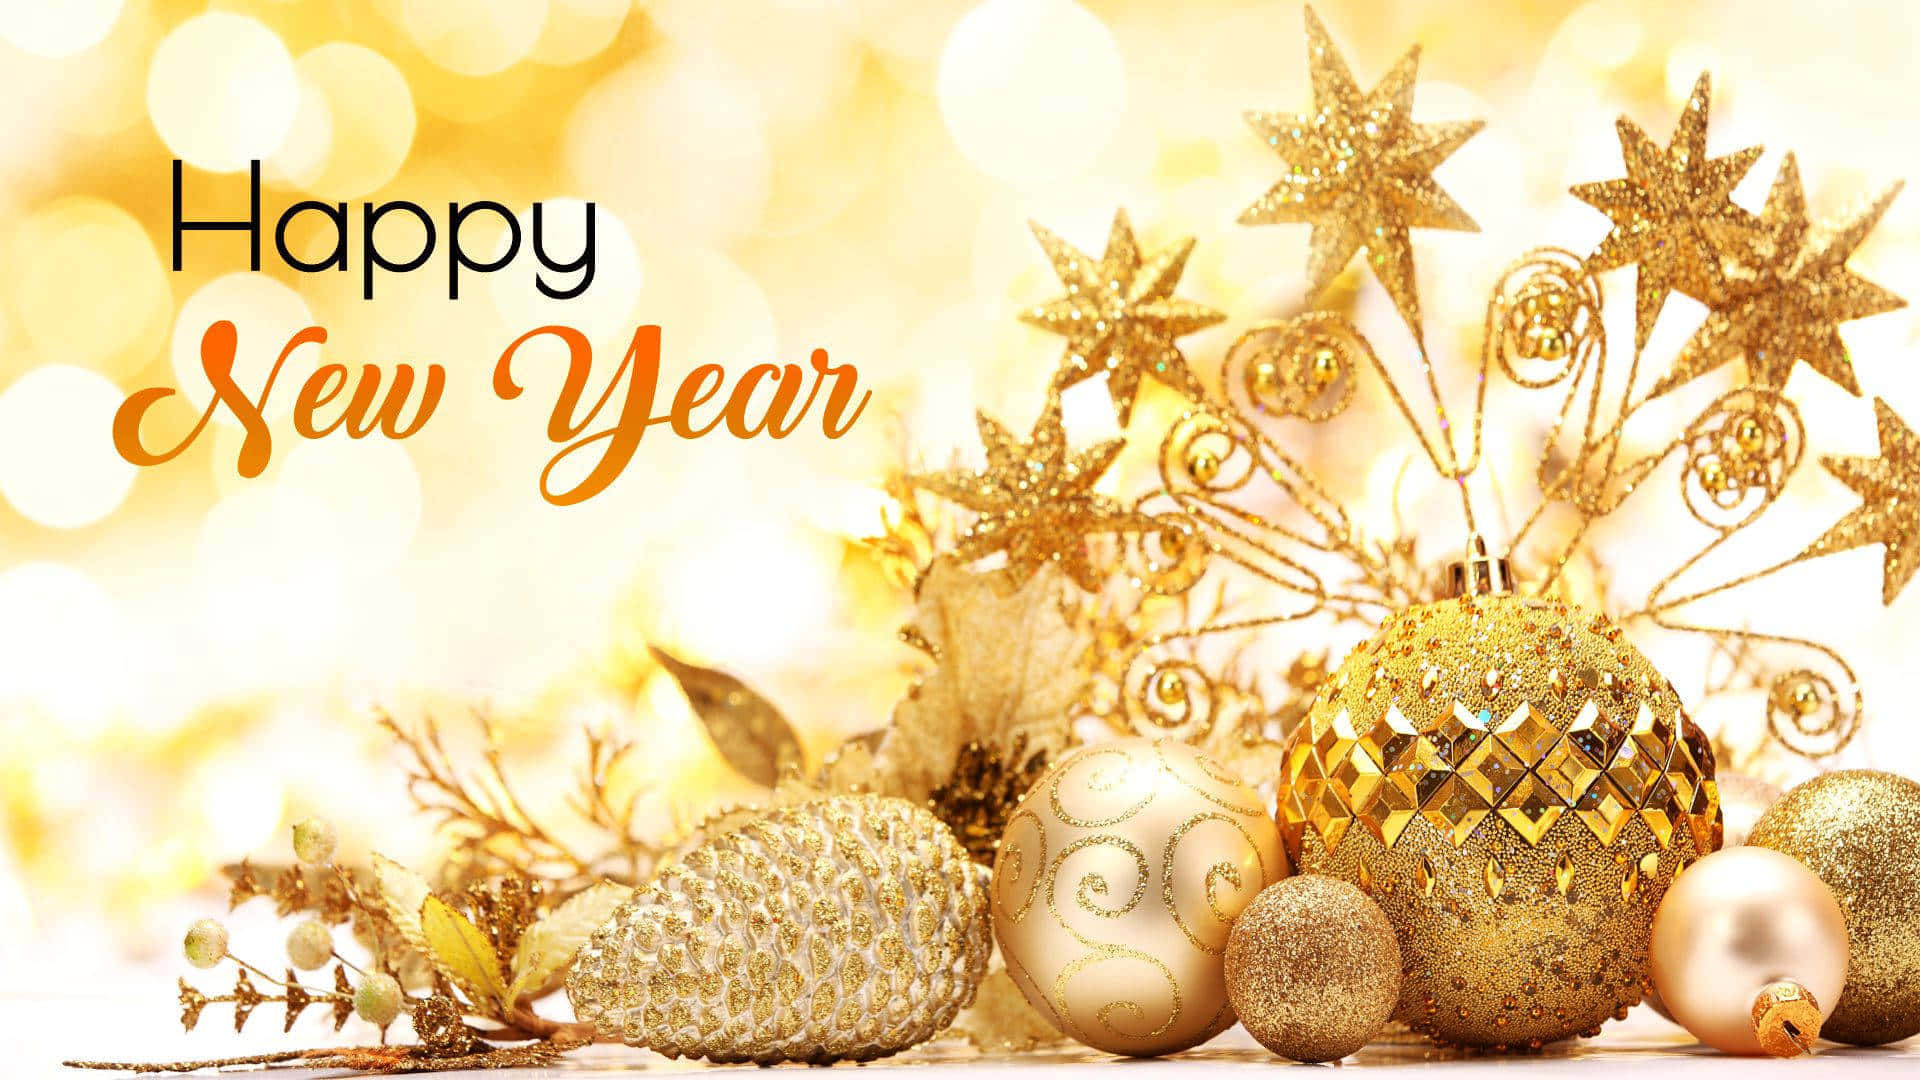 Happy New Year Images With Golden Ornaments